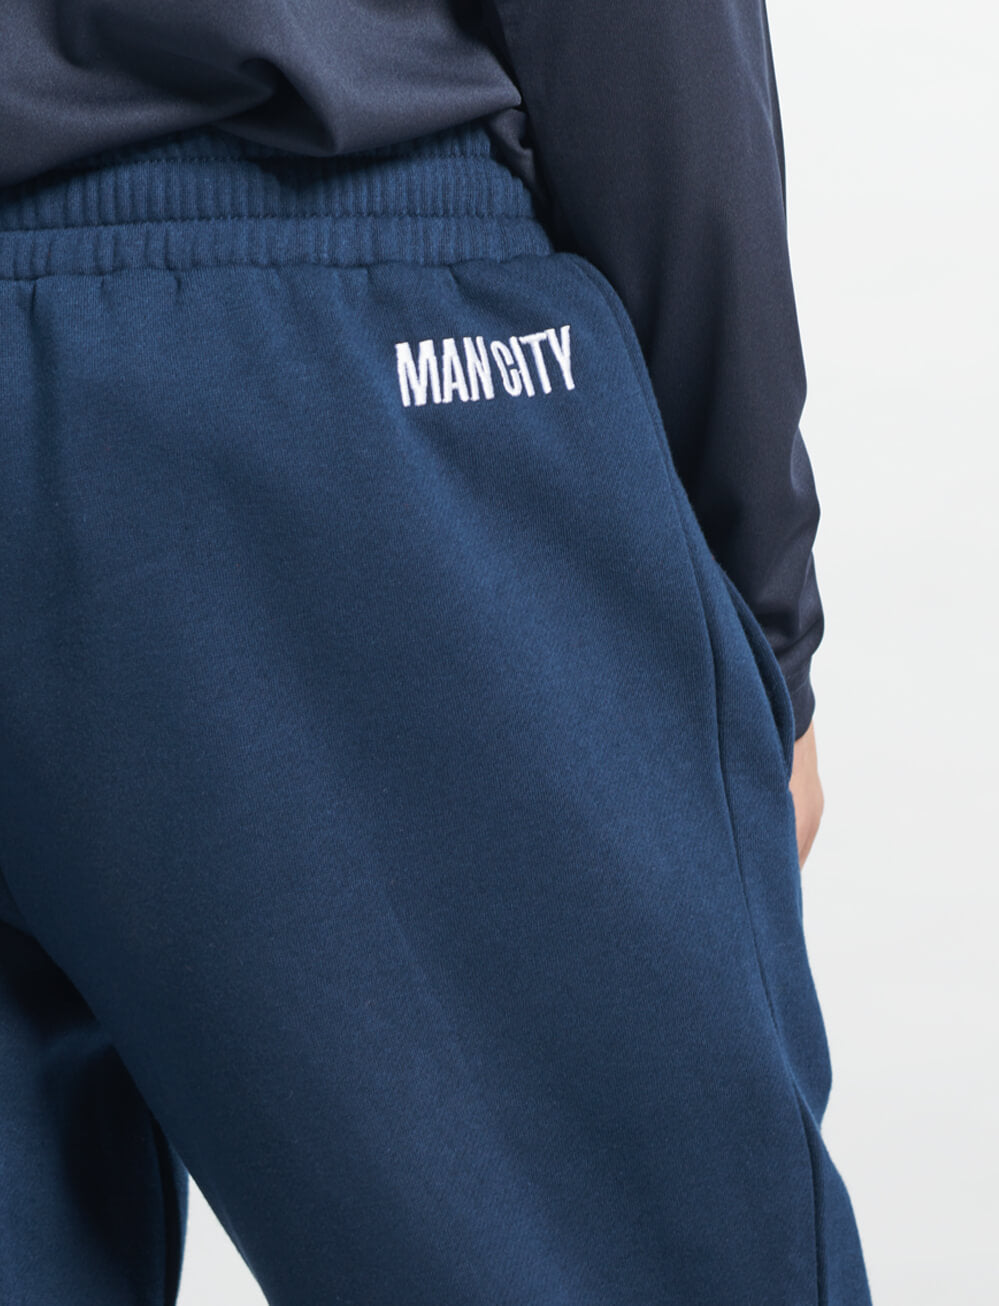 Official Manchester City Joggers - Navy - The World Football Store